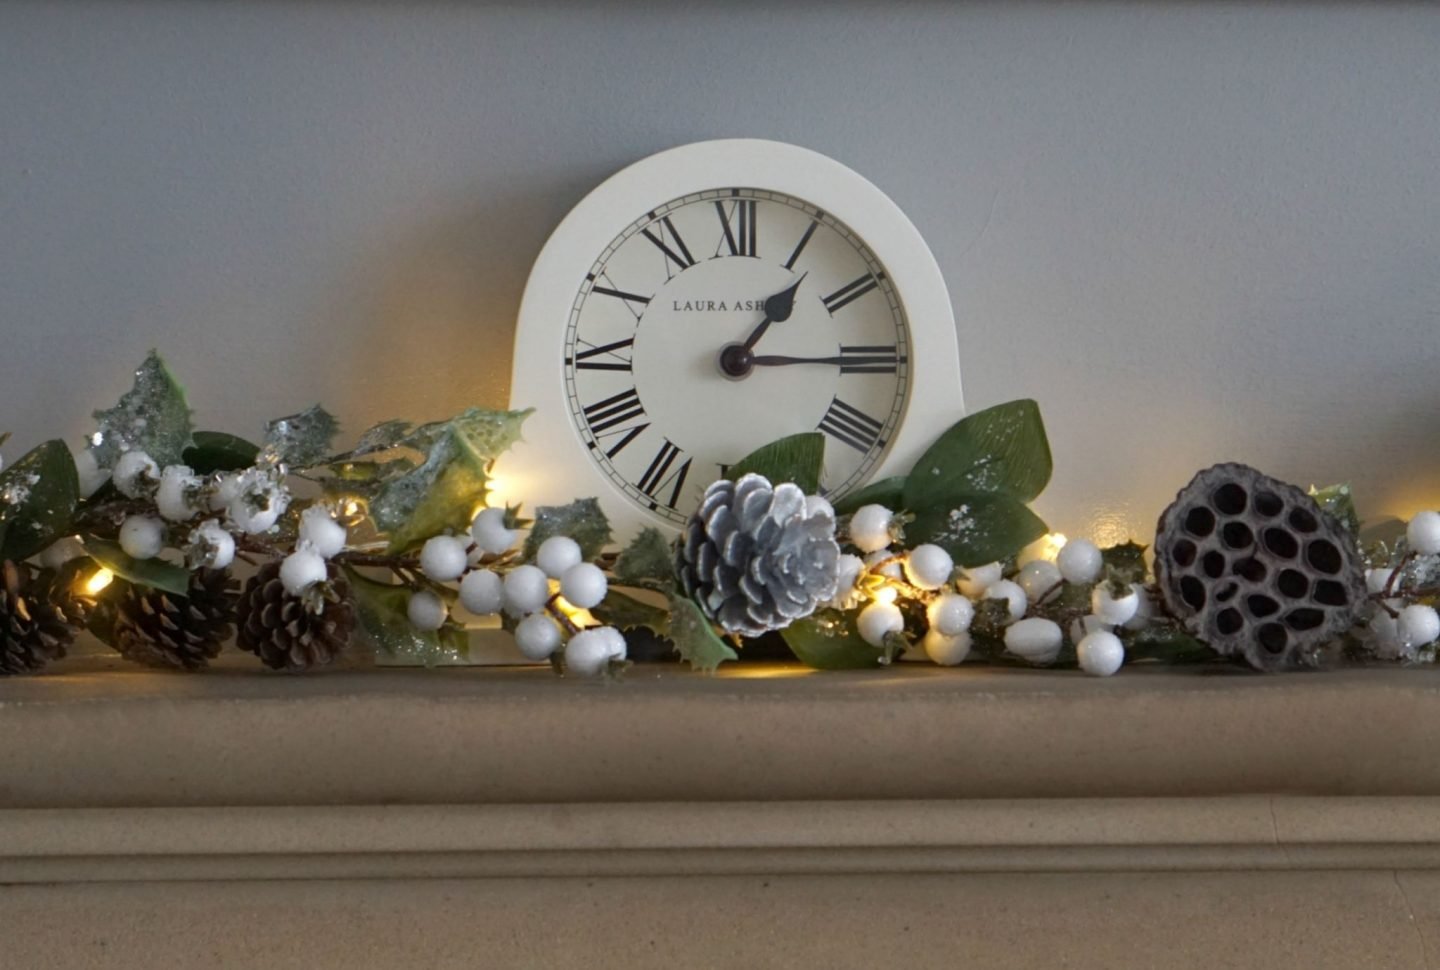 Cream Mantle Clock from Laura Ashely www.extraordinarychaos.com